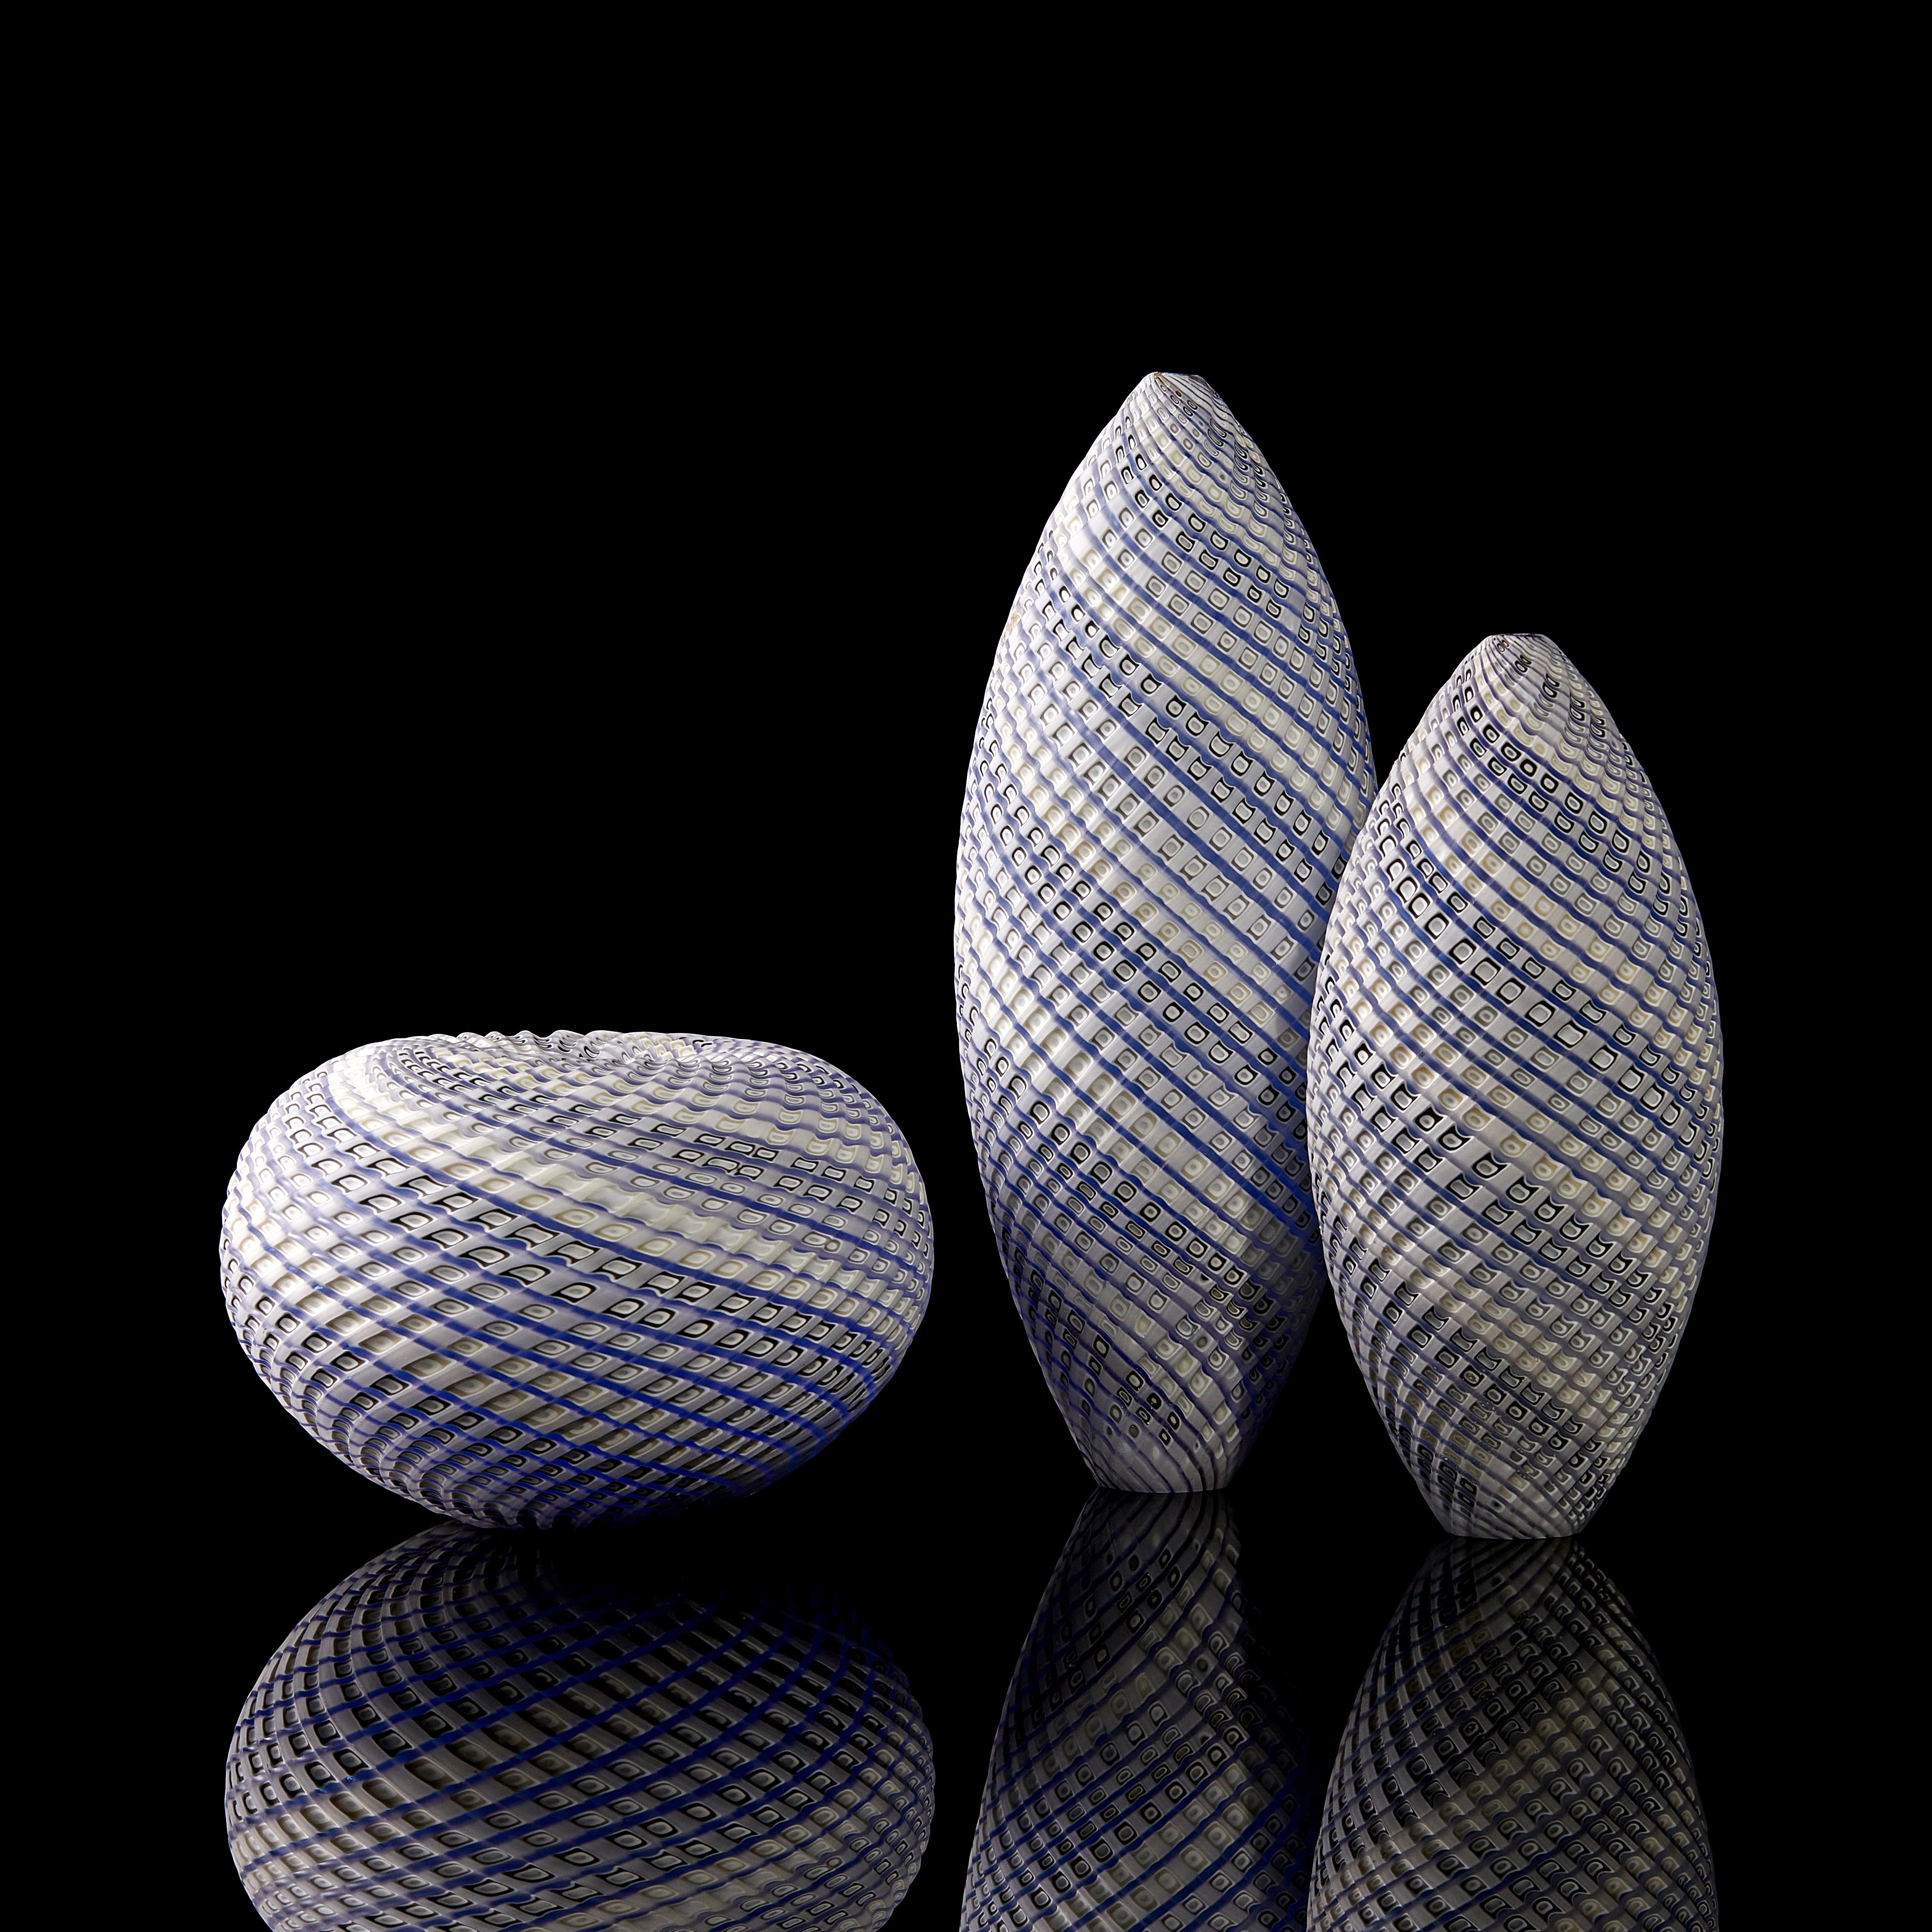 Organic Modern Woven Three Tone Blue Trio, a Blue and White Glass Installation by Layne Rowe